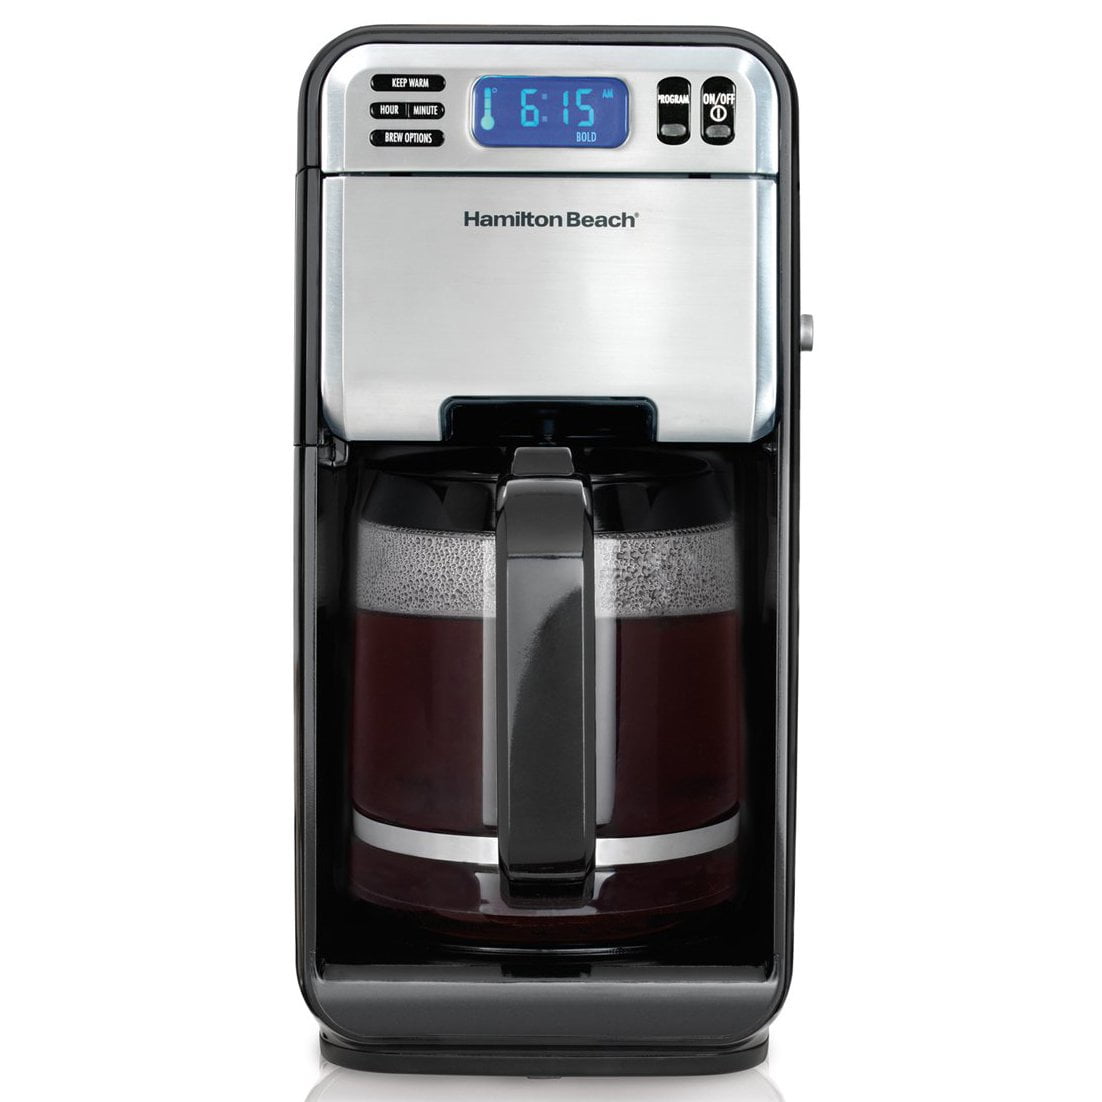 Hamilton Beach 12 Cup Coffee Maker, 96 fl oz, Stainless Steel Accents, 49631